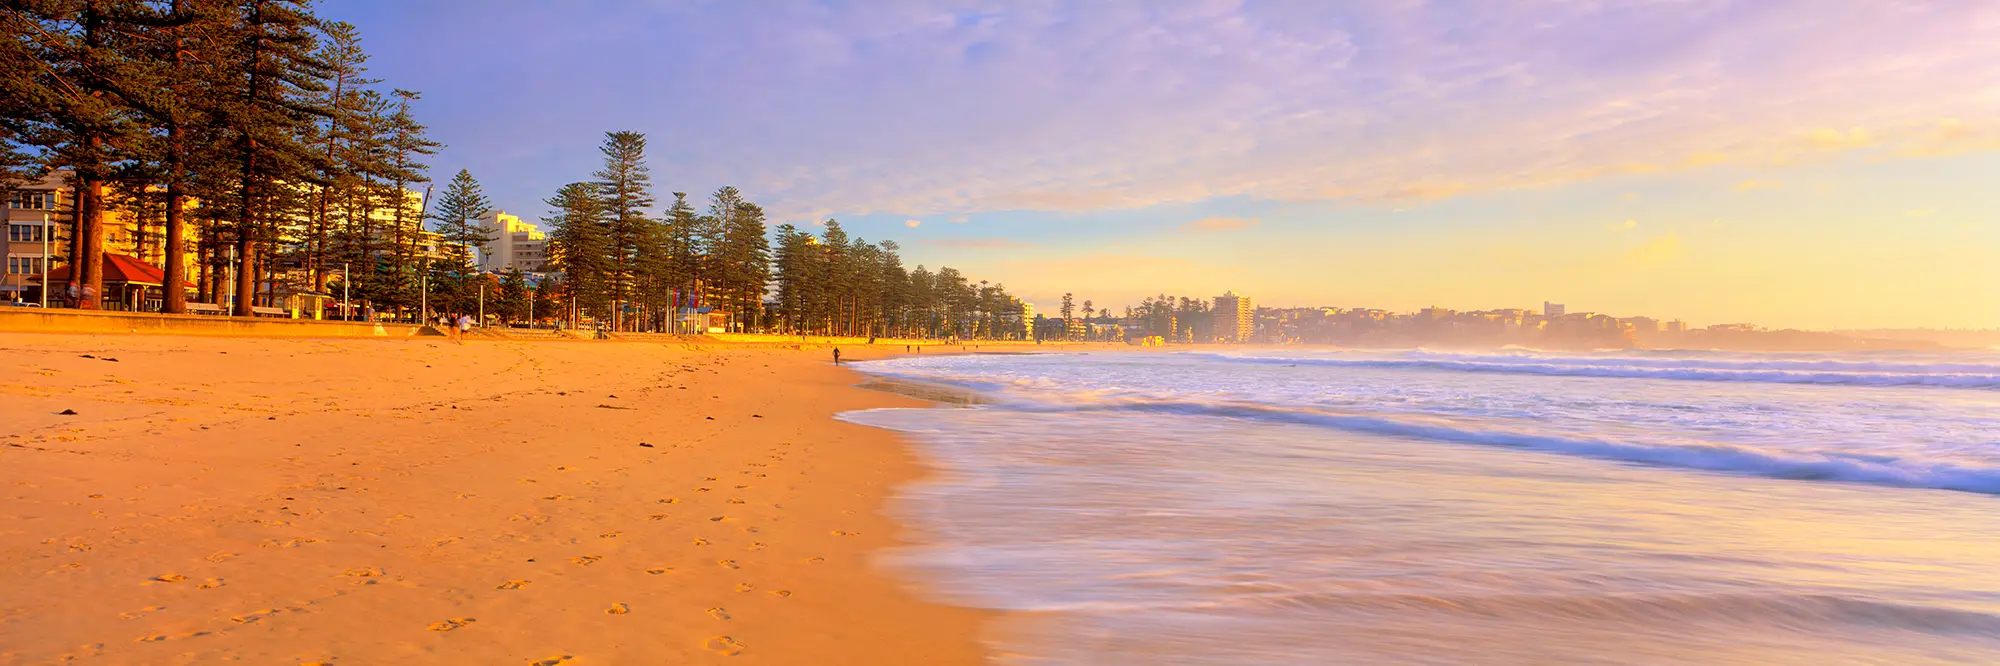 Manly Beach Golden Sunrise Panoramic Photo - Fine Art Images